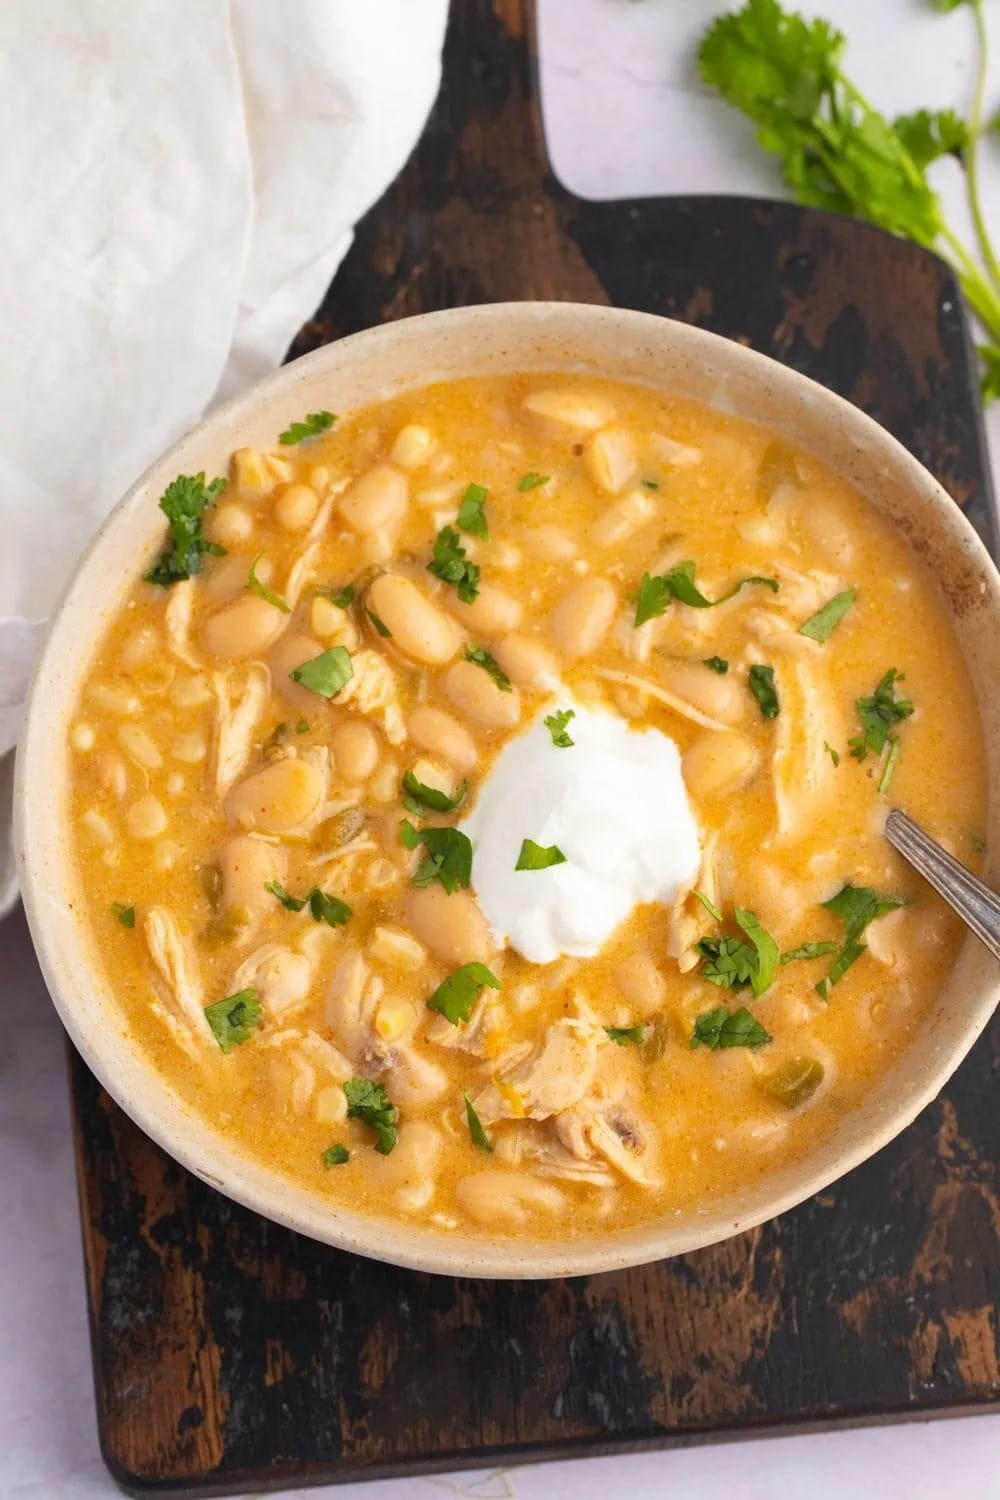 Bowl of Crockpot White Chicken Chili on a Wooden Board